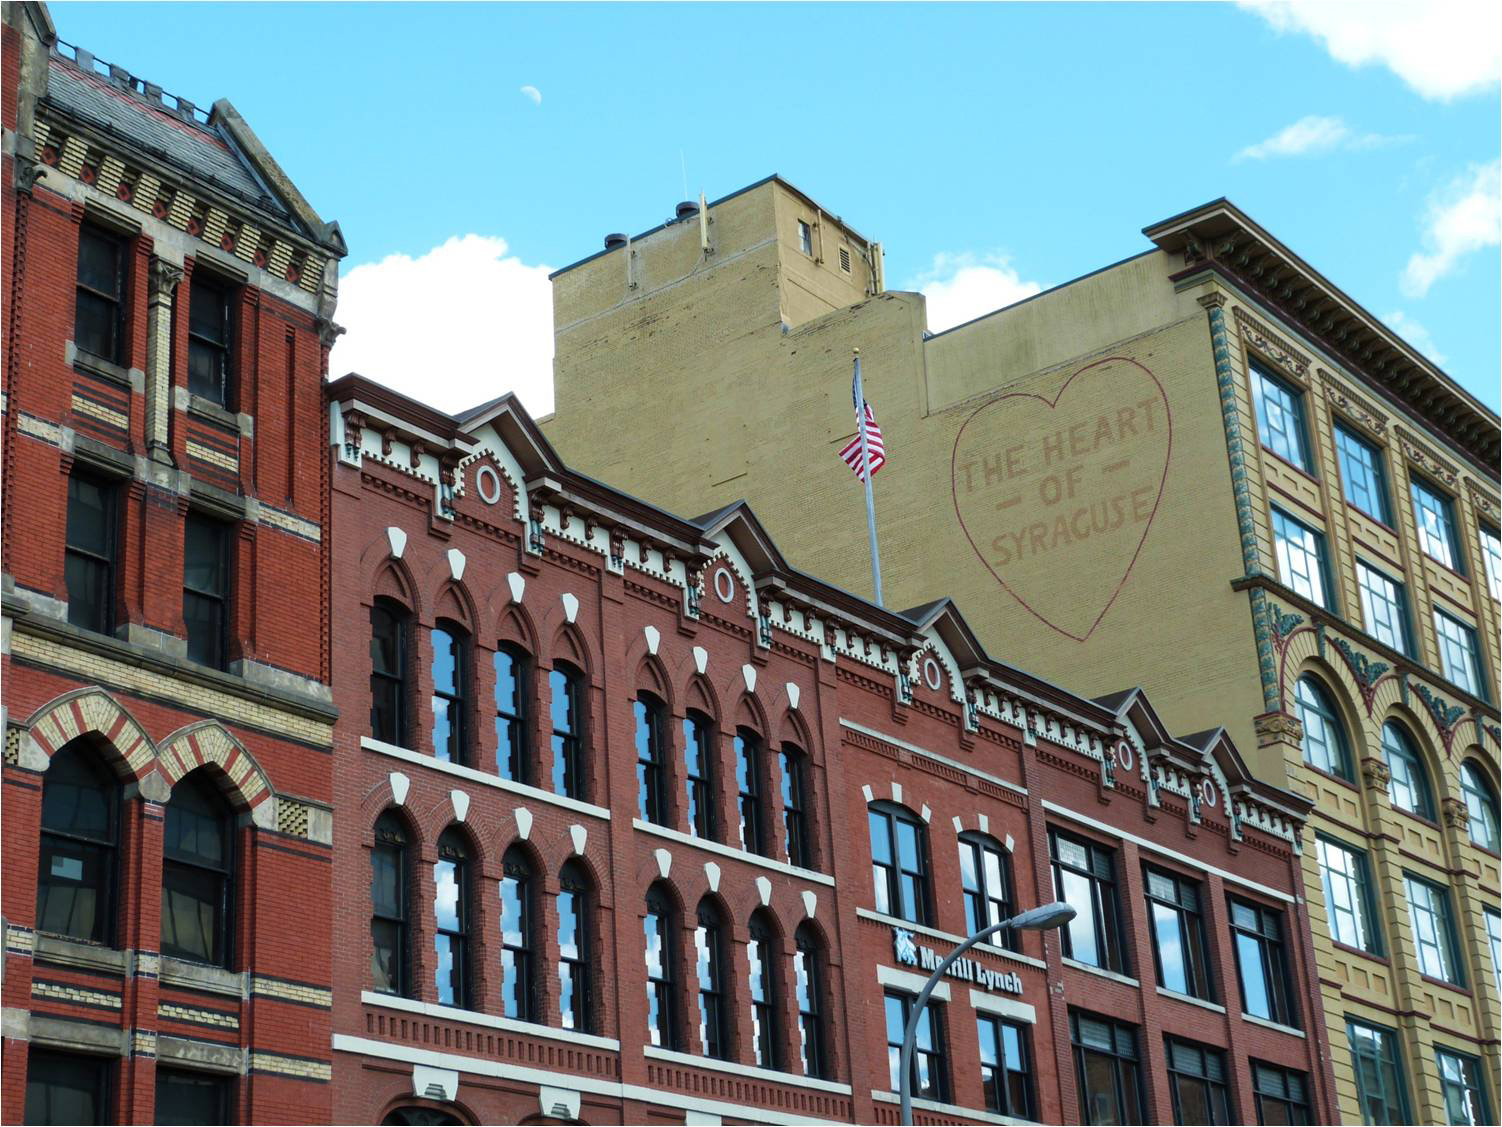 Mural on brick building reads "The Heart of Syracuse"